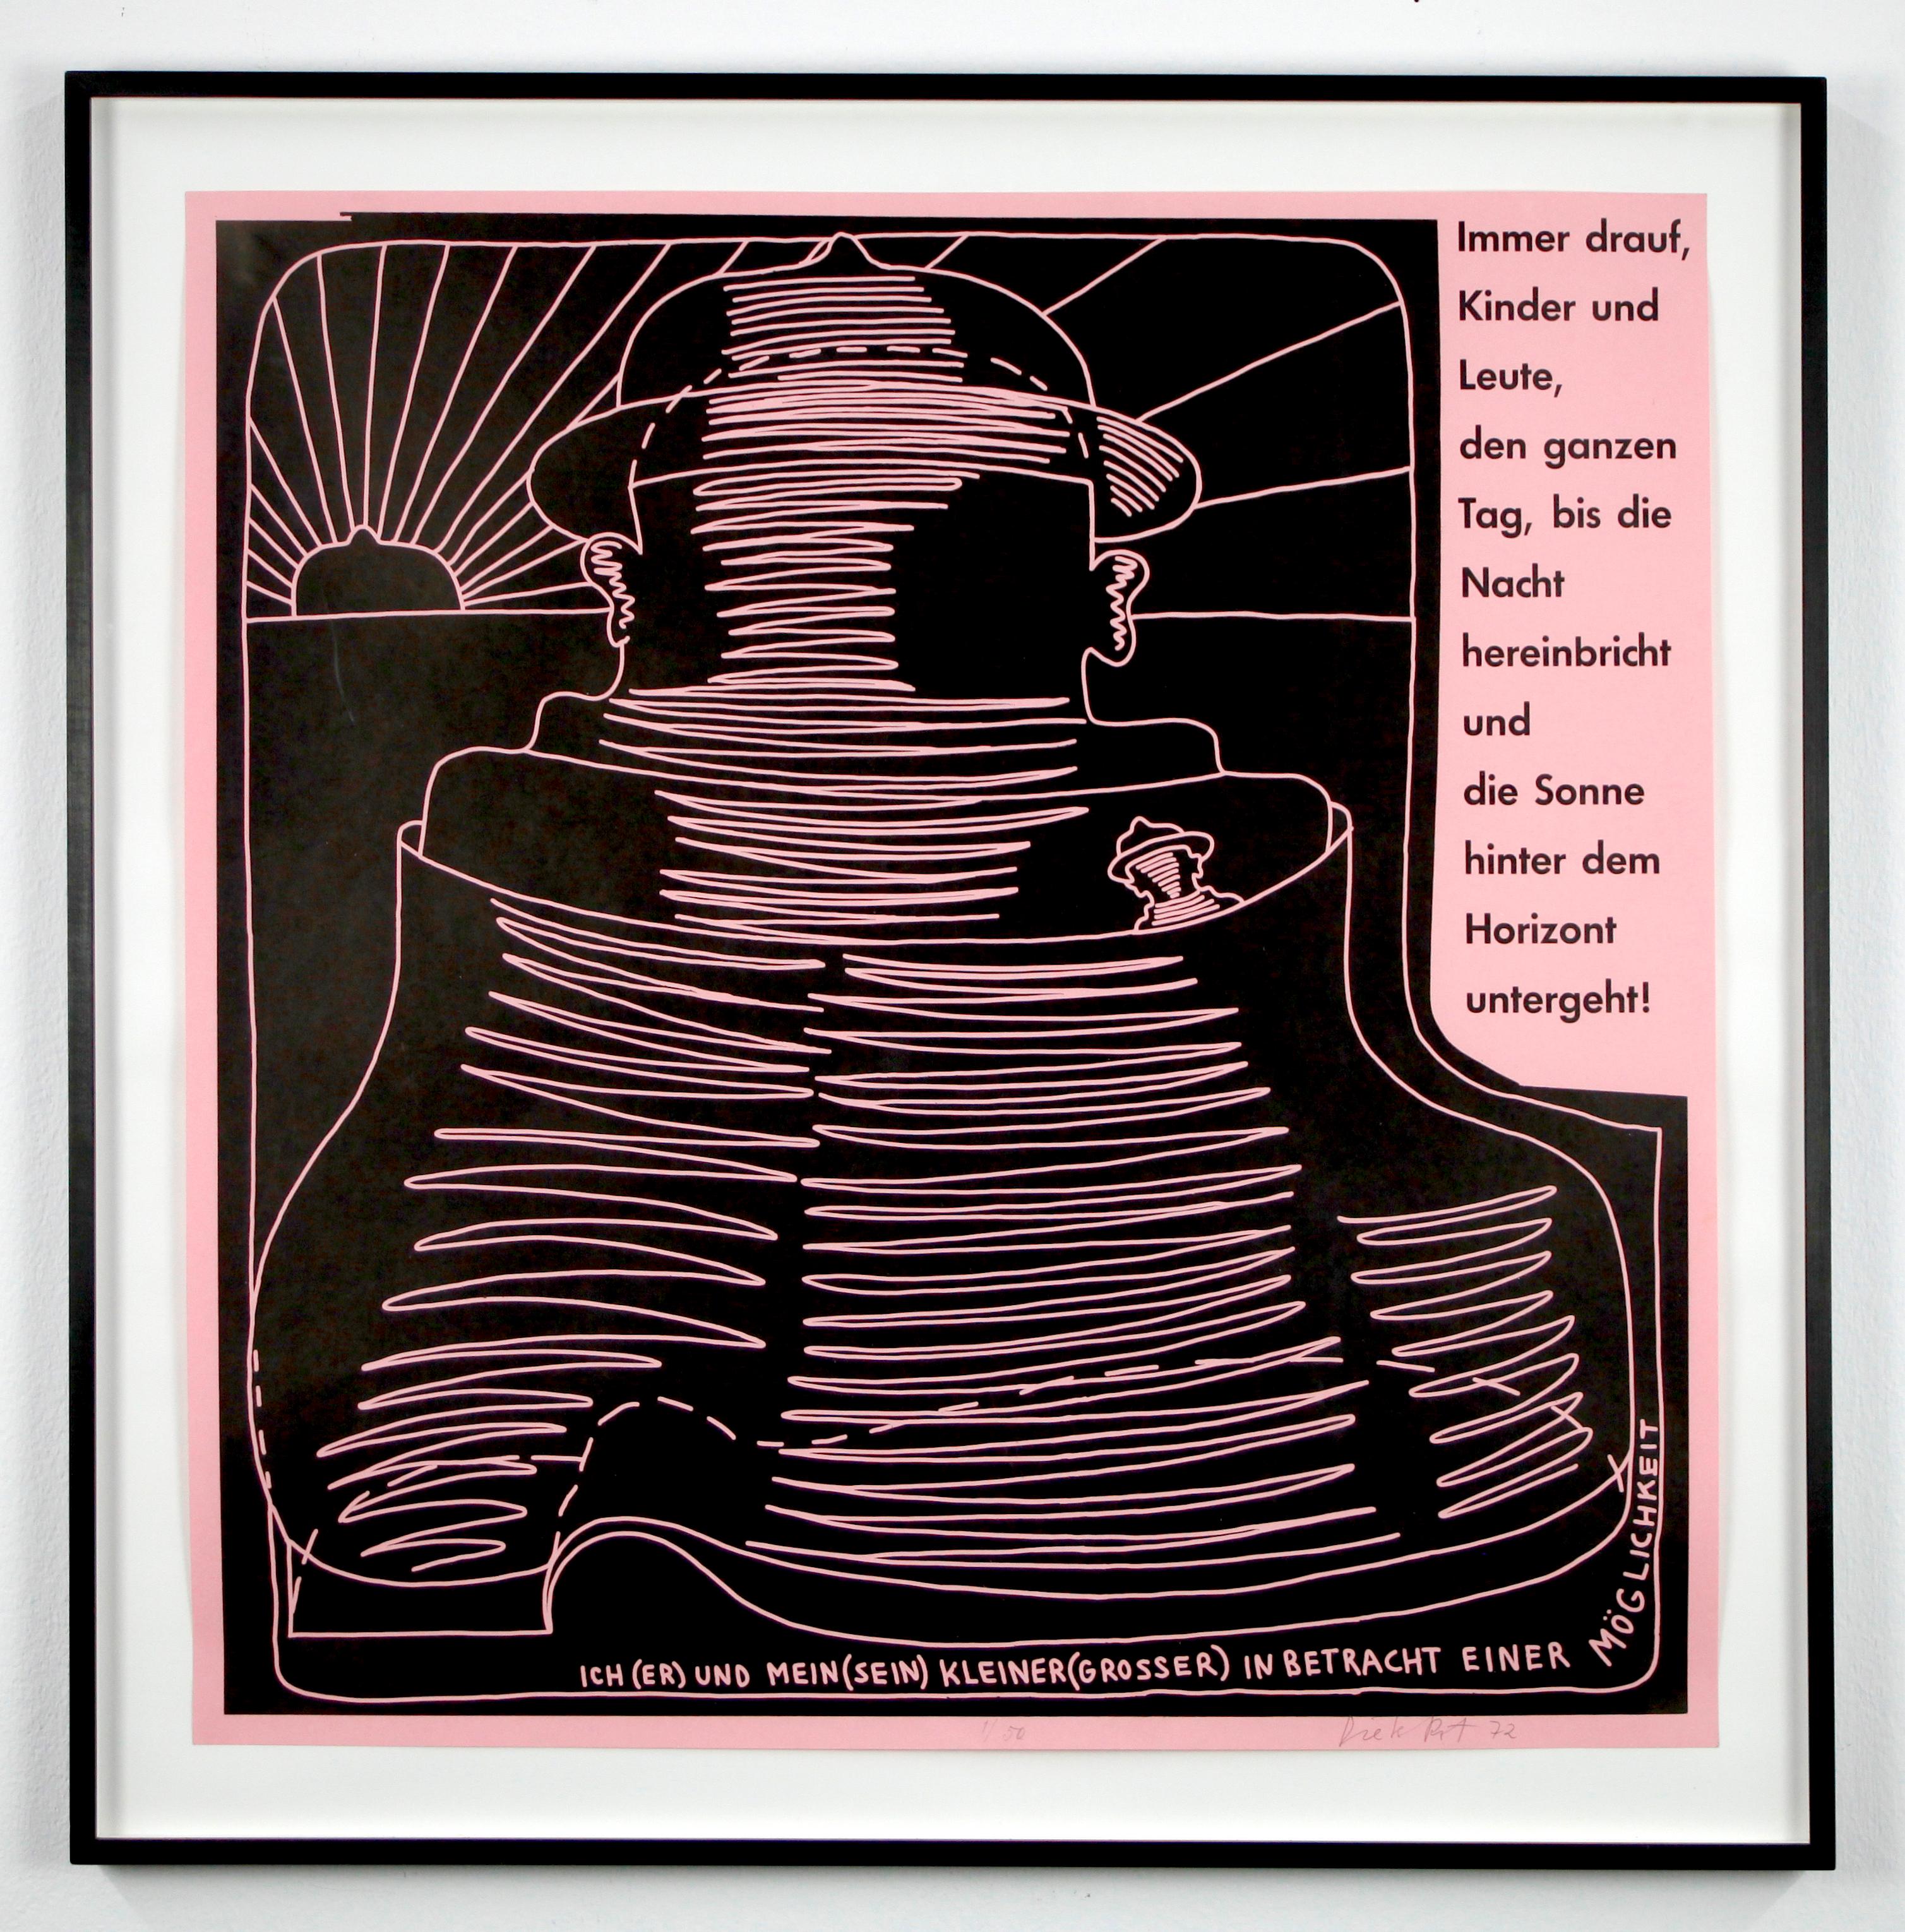 Dieter Roth Print - "Always on", original book print, signed and numbered by Roth, abstract poetry